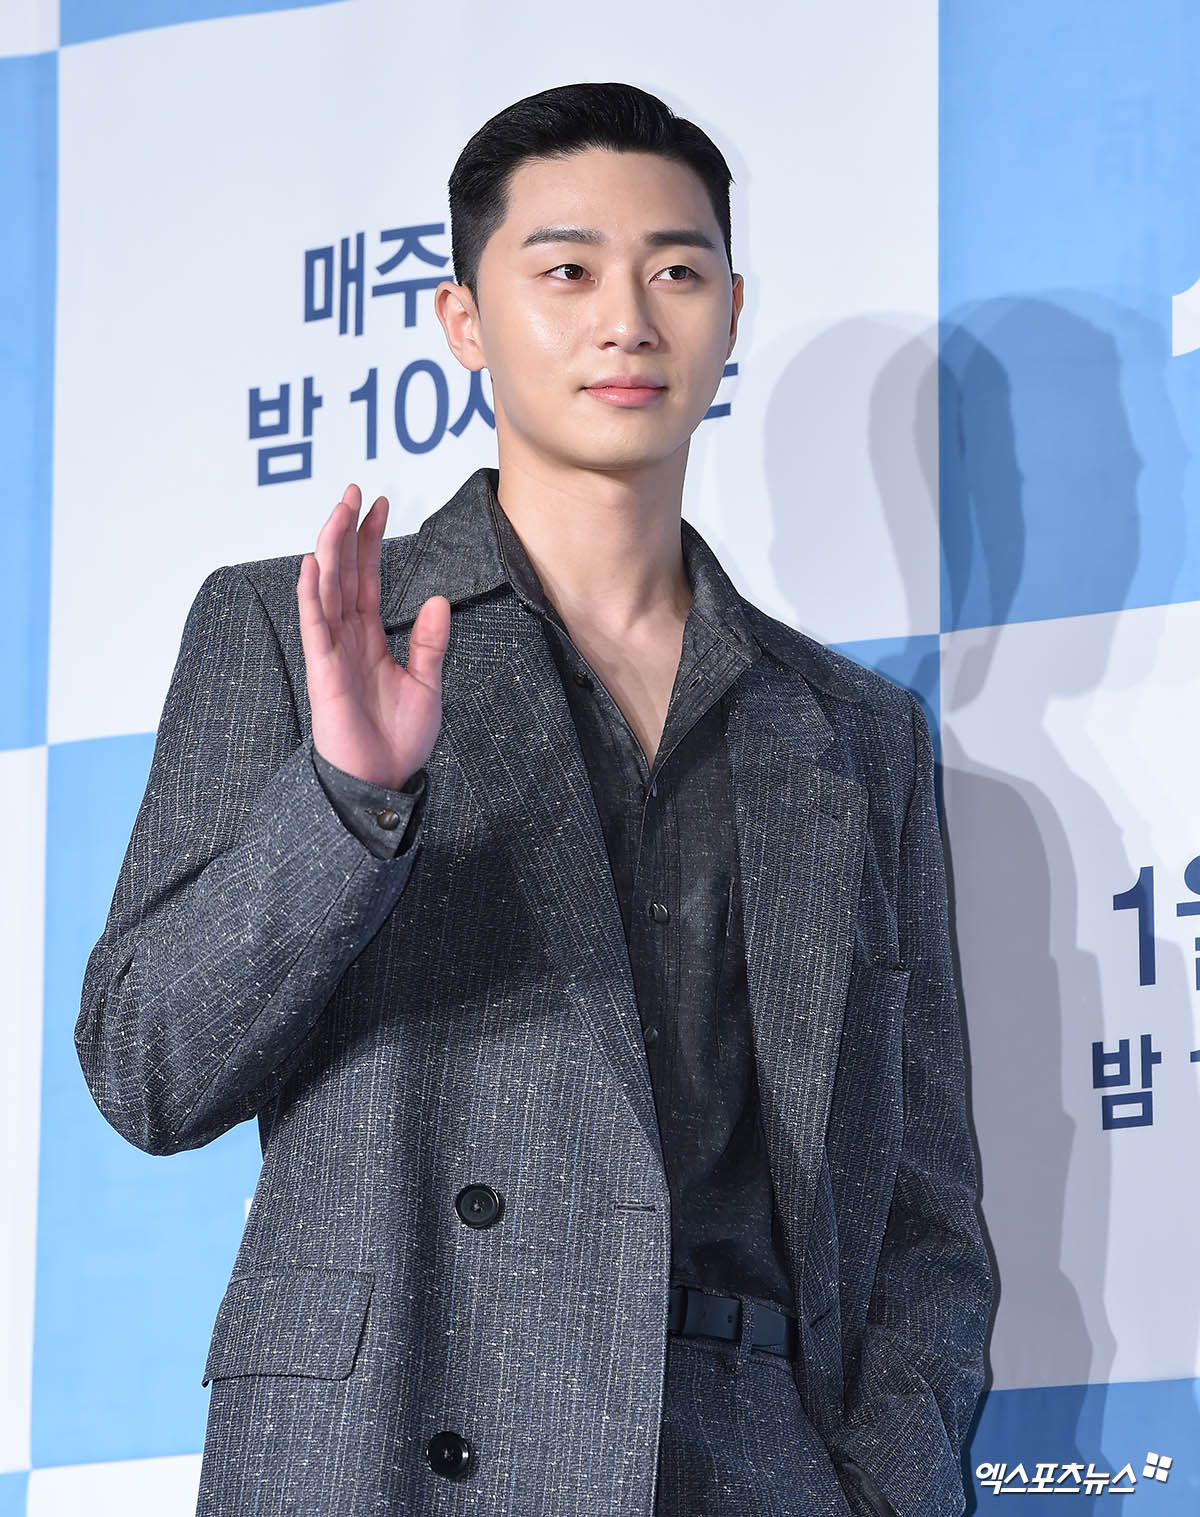 Park Seo-joon reveals why he is Top Model on youth againOn the 30th, JTBCs new gilt drama Itaewon Clath production presentation was held at the Seoul Yeouido Conrad Hotel.Park Seo-joon, Kim Dae-mi, Yoo Jae-myeong, Kwon Na-ra, Kim Sung-yoon and Cho Kwang-jin attended the production presentation.Itaewon Clath is a work that depicts the hip rebellion of youths who are united in an unreasonable world, stubbornness and popularity.Their entrepreneurial myths, which pursue freedom with their own values ​​in the small streets of Itaewon, which seem to have compressed the world, will be dynamically drawn.Park Seo-joon, who has been a top model for youth such as Ssam, My Way and Youth Police, said, I do not think I liked youths and Choices.I think that I am enjoying my work expressing my youth because I am a youth. This work also represents youth, so I enjoyed the original rather than Choices, and the role of the new one is very attractive in the original work.I can not say that I want to do it, but I have a chance to come in and get this opportunity.Meanwhile, Itaewon Clath will be broadcasted at 10:50 pm on the 31st.